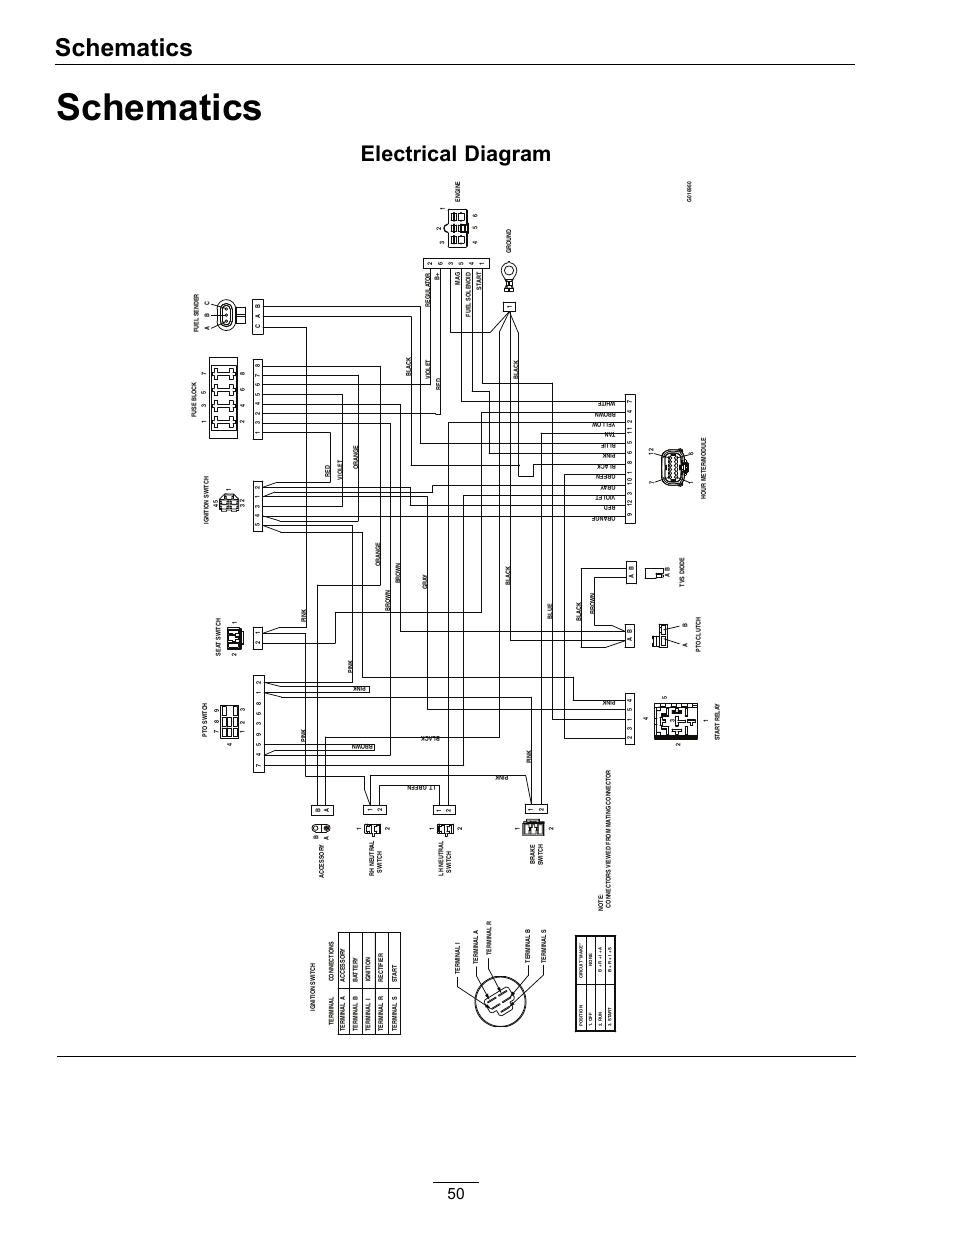 3 Wire Fan Capacitor Wiring Diagram Exclusive Wiring Diagram Design